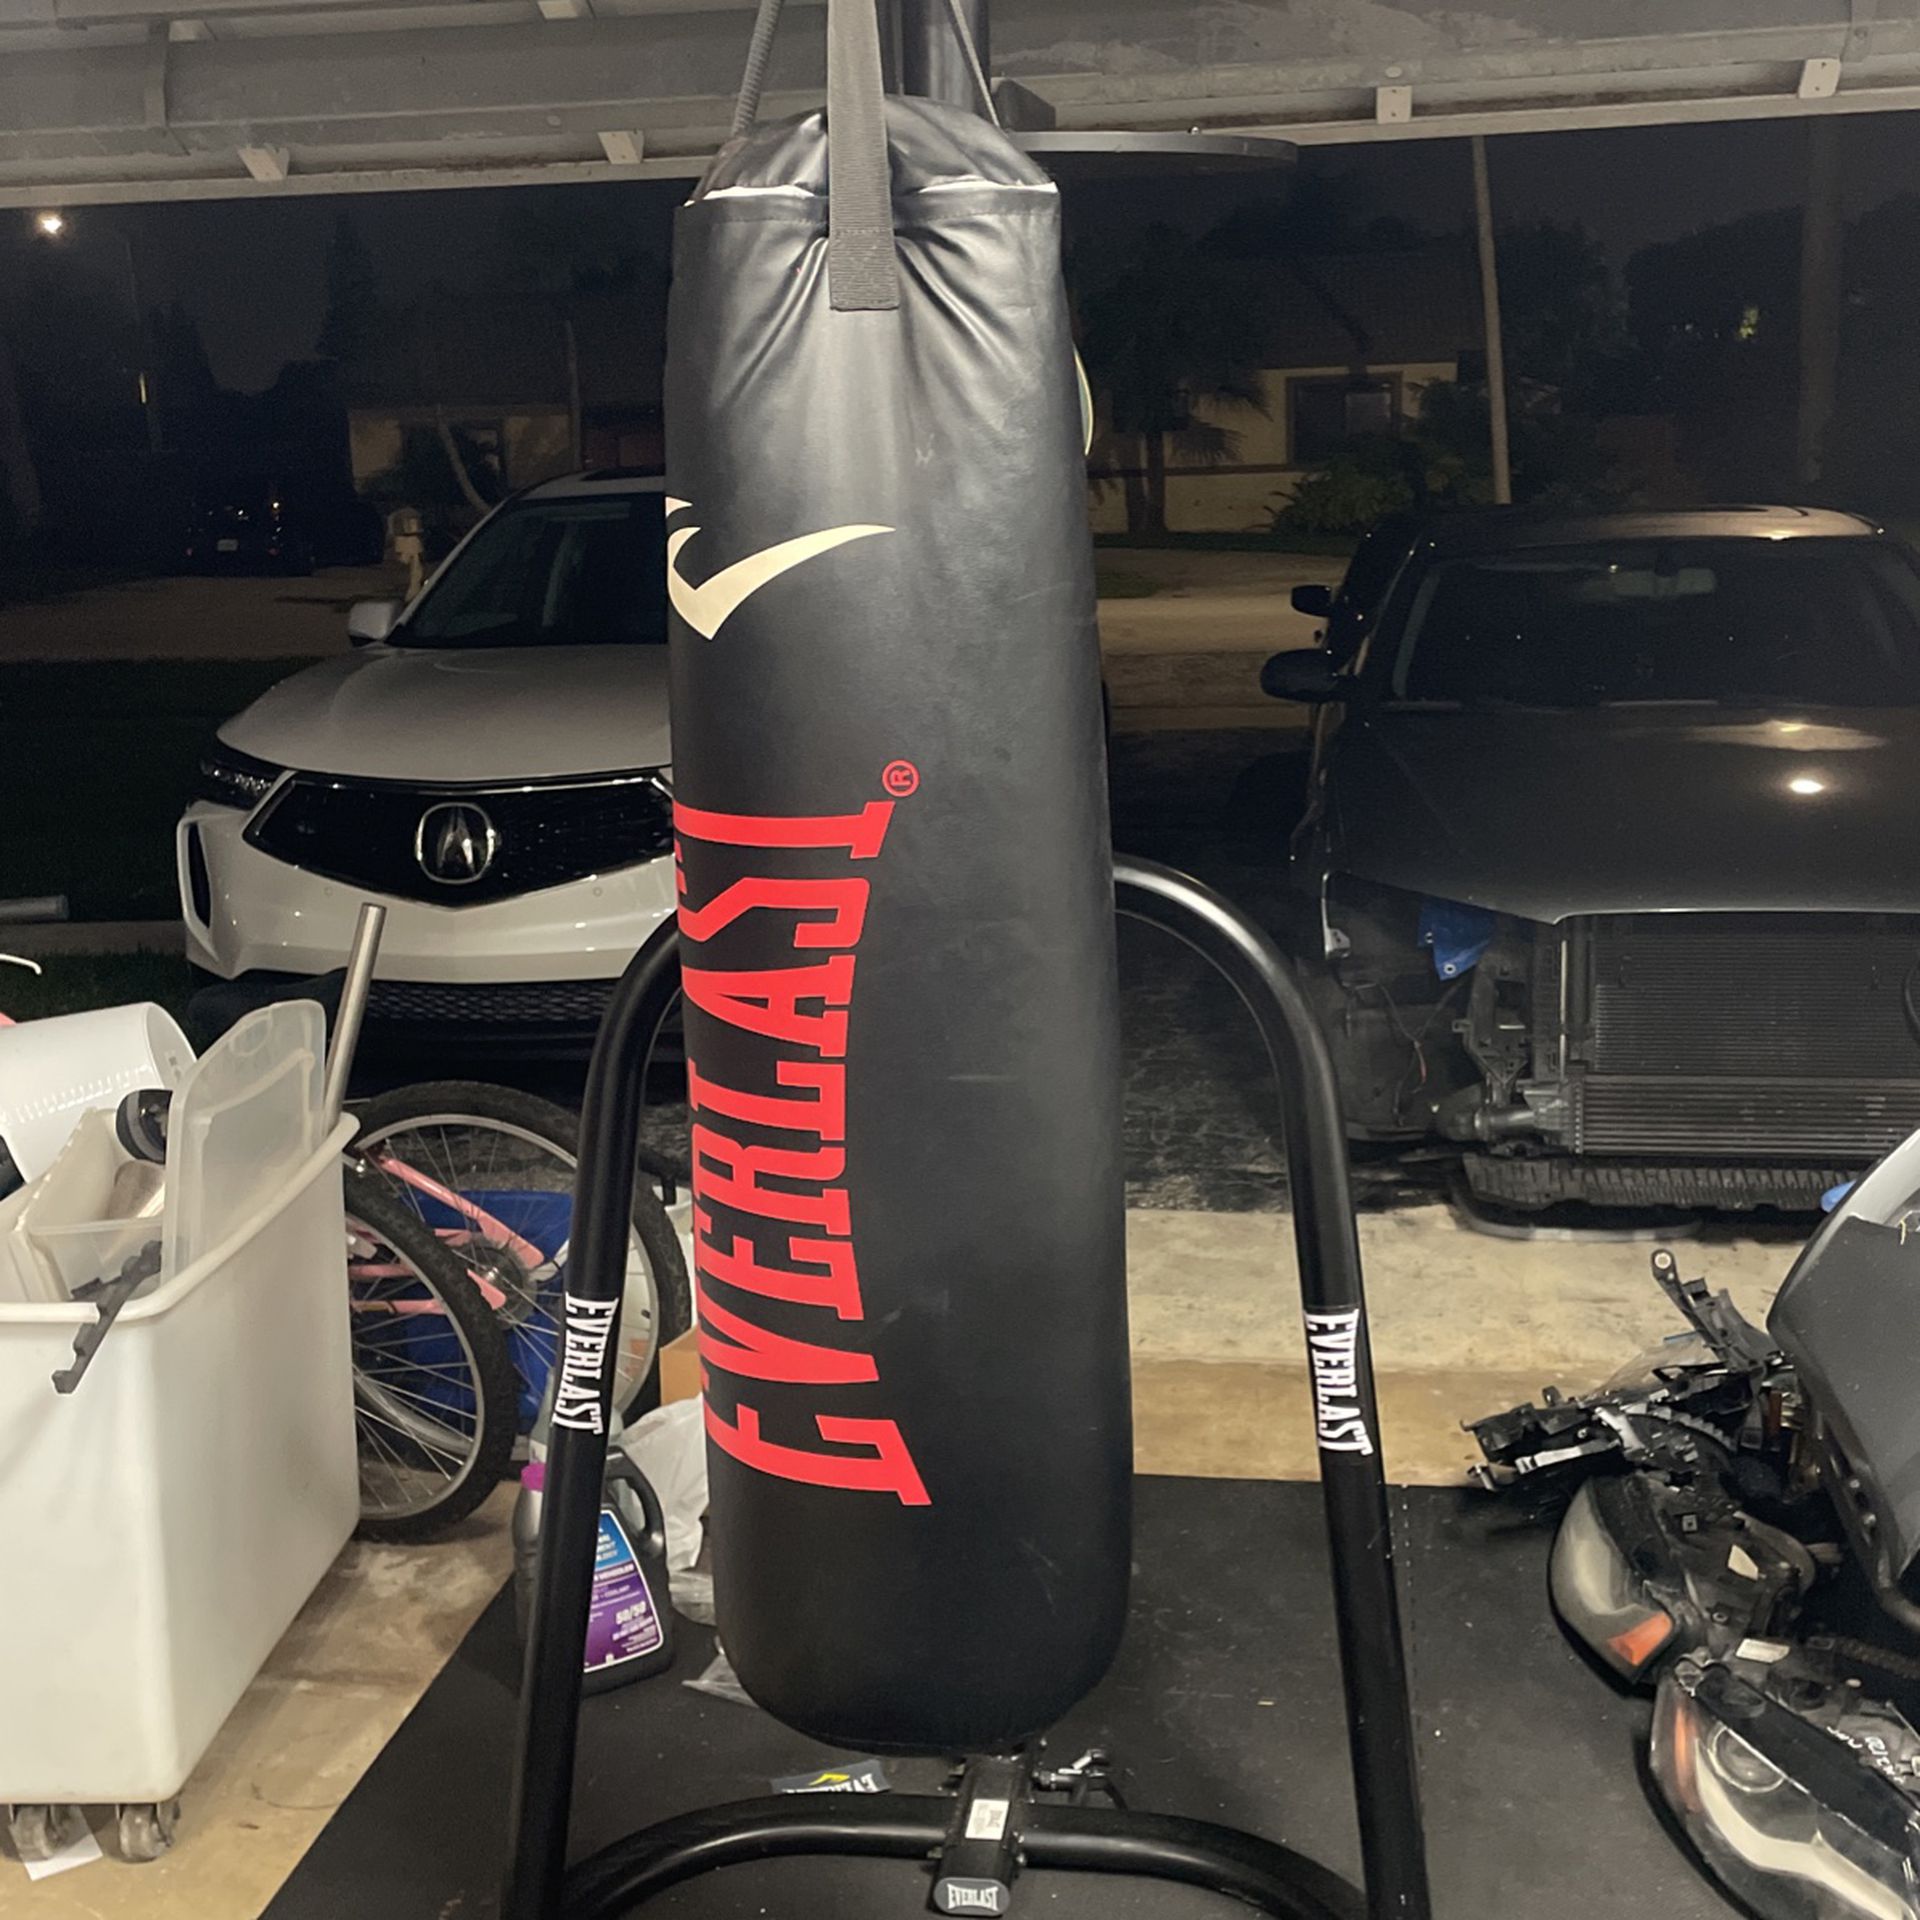 Everlast Dual Station Punching Bag Stand w/ 100 lb PowerCore Heavy Bag and Everhide Speed Bag